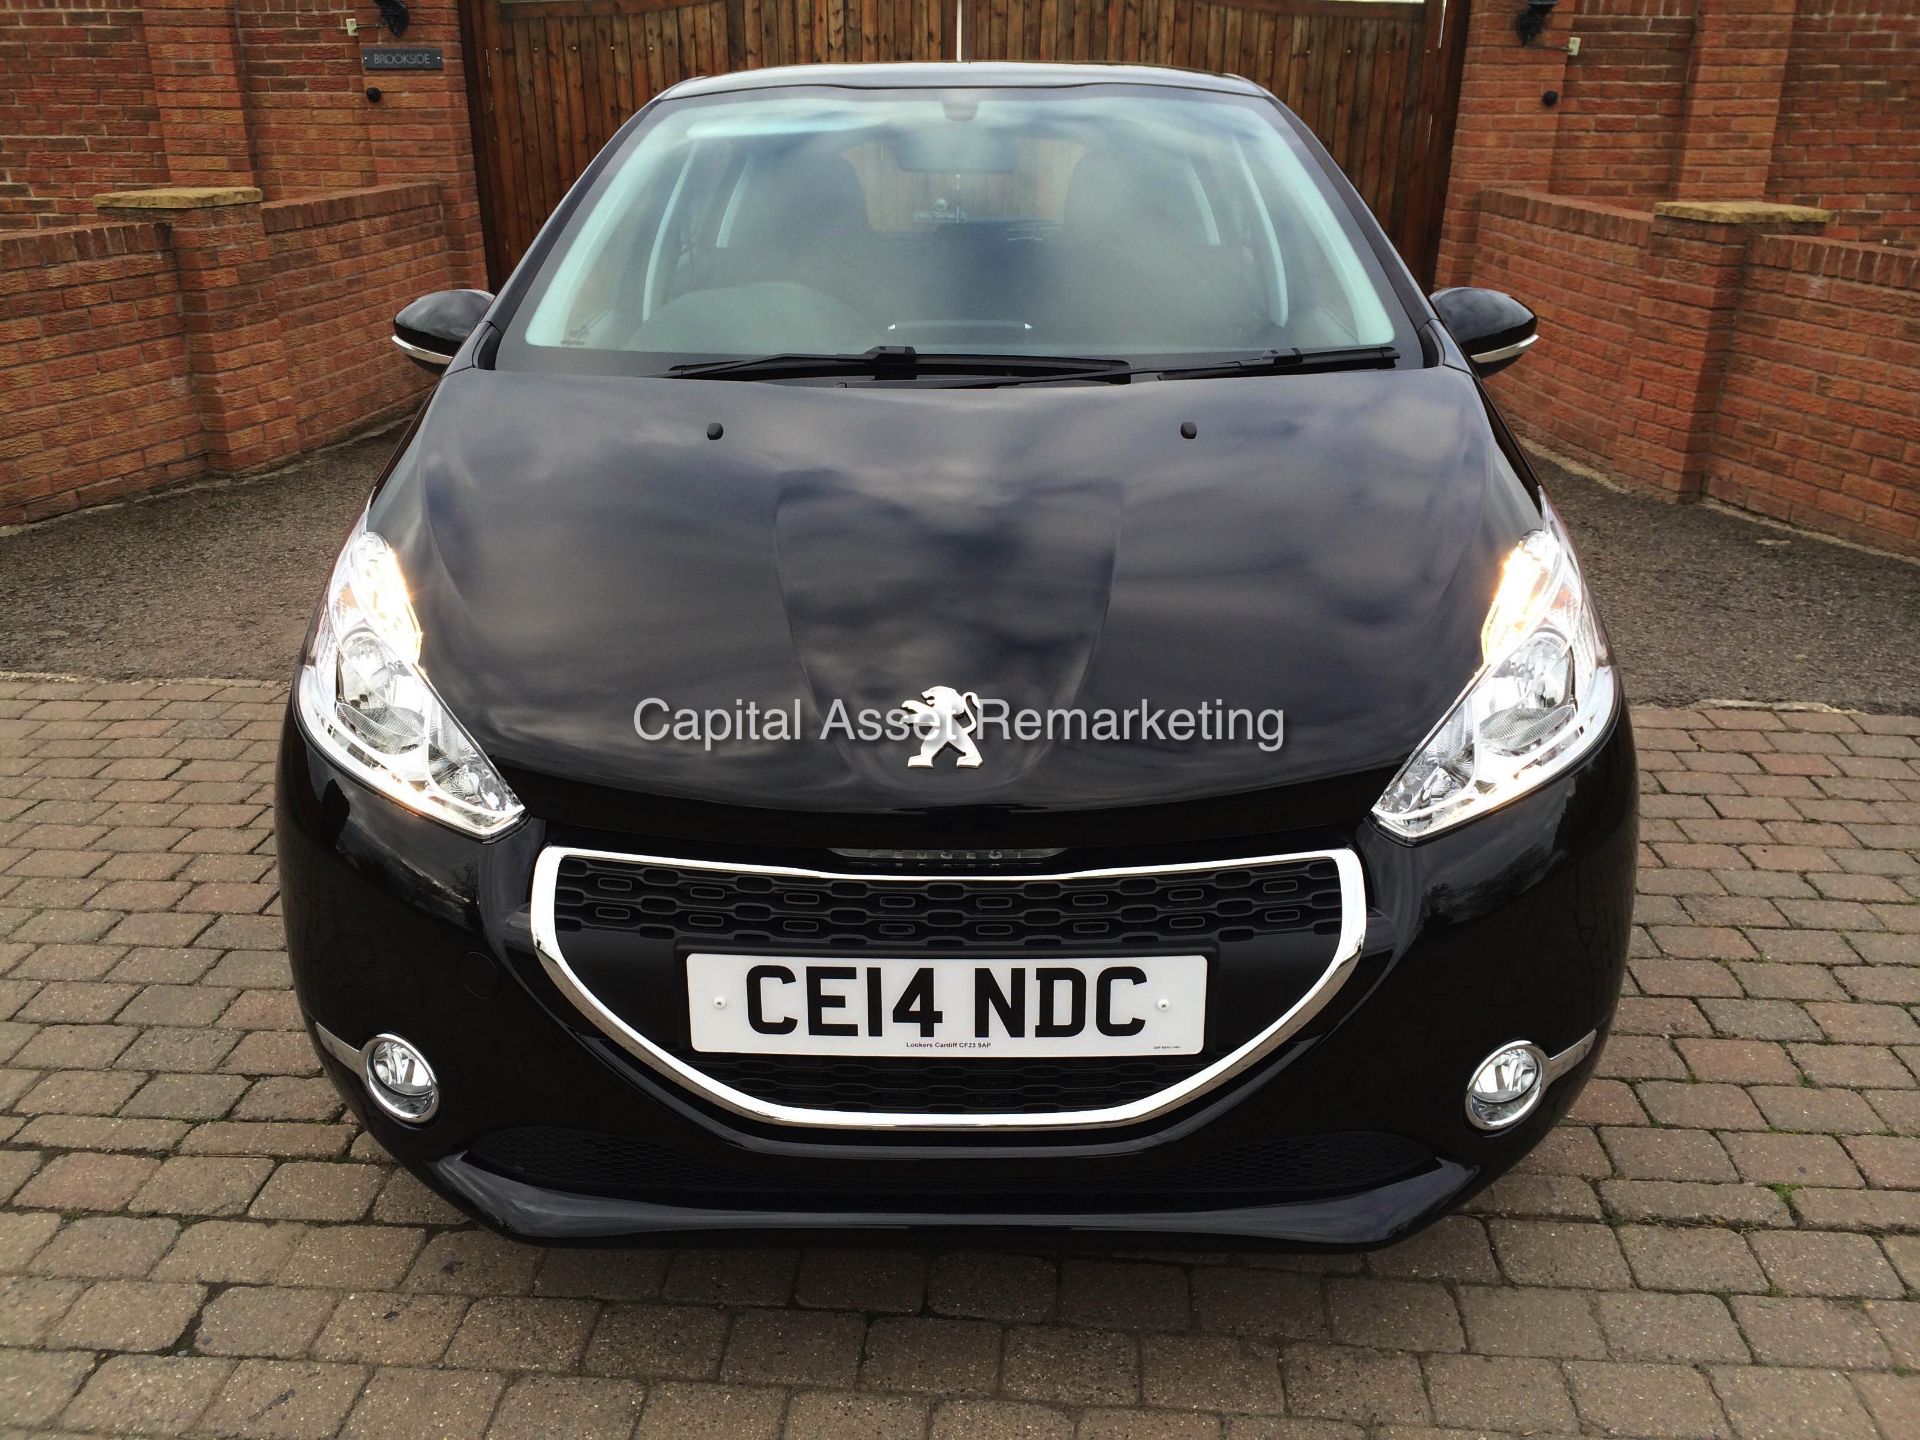 PEUGEOT 208 1.4 HDI 'ACTIVE' 5 DOOR (2014 - 14 REG)  **OWNED BY PEUGEOT FROM NEW** - Image 2 of 15